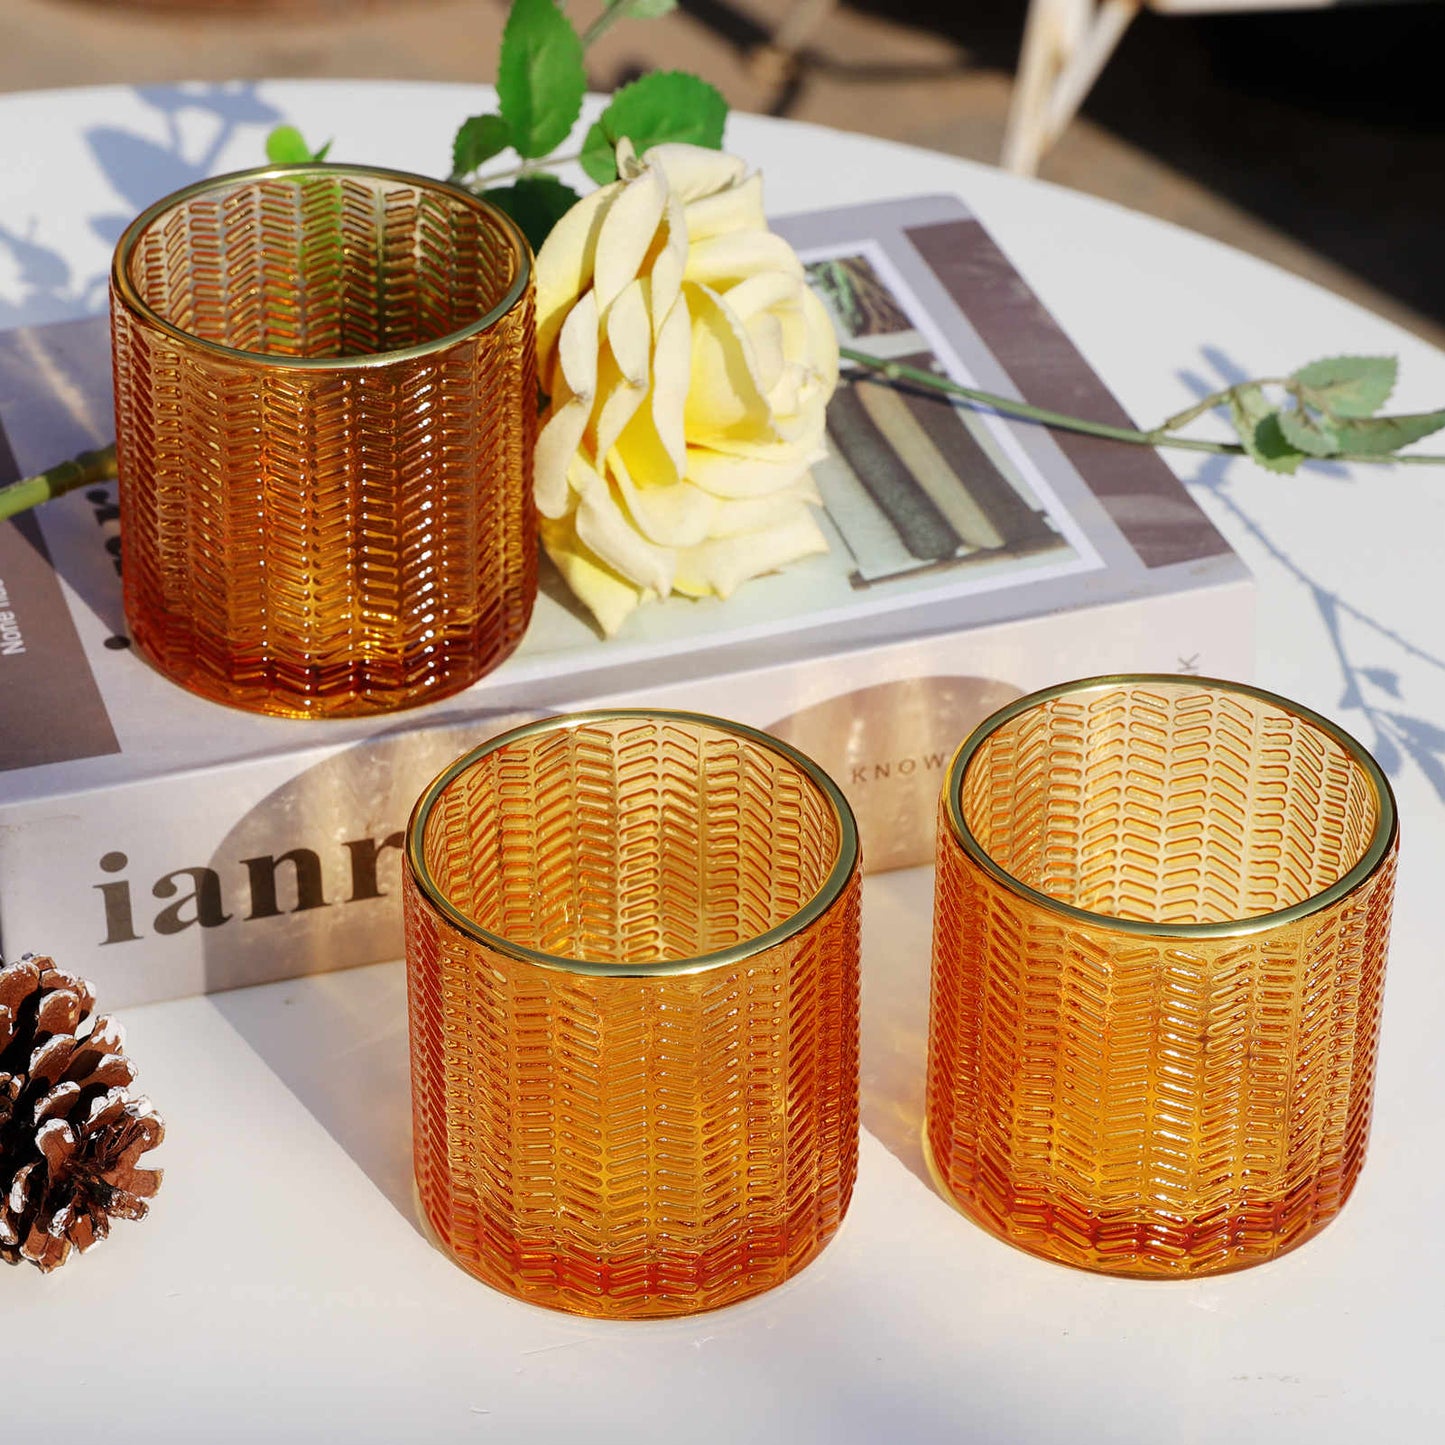 VOHO Wheat Votive Candle Holders for Holiday Candles, Glass Tealight Candle Holder Set of 6 with Gold Rim, Amber Votive Candle Holders for Table Centerpiece(2.75'' x 2.75'', Gold Amber) - vohocandle